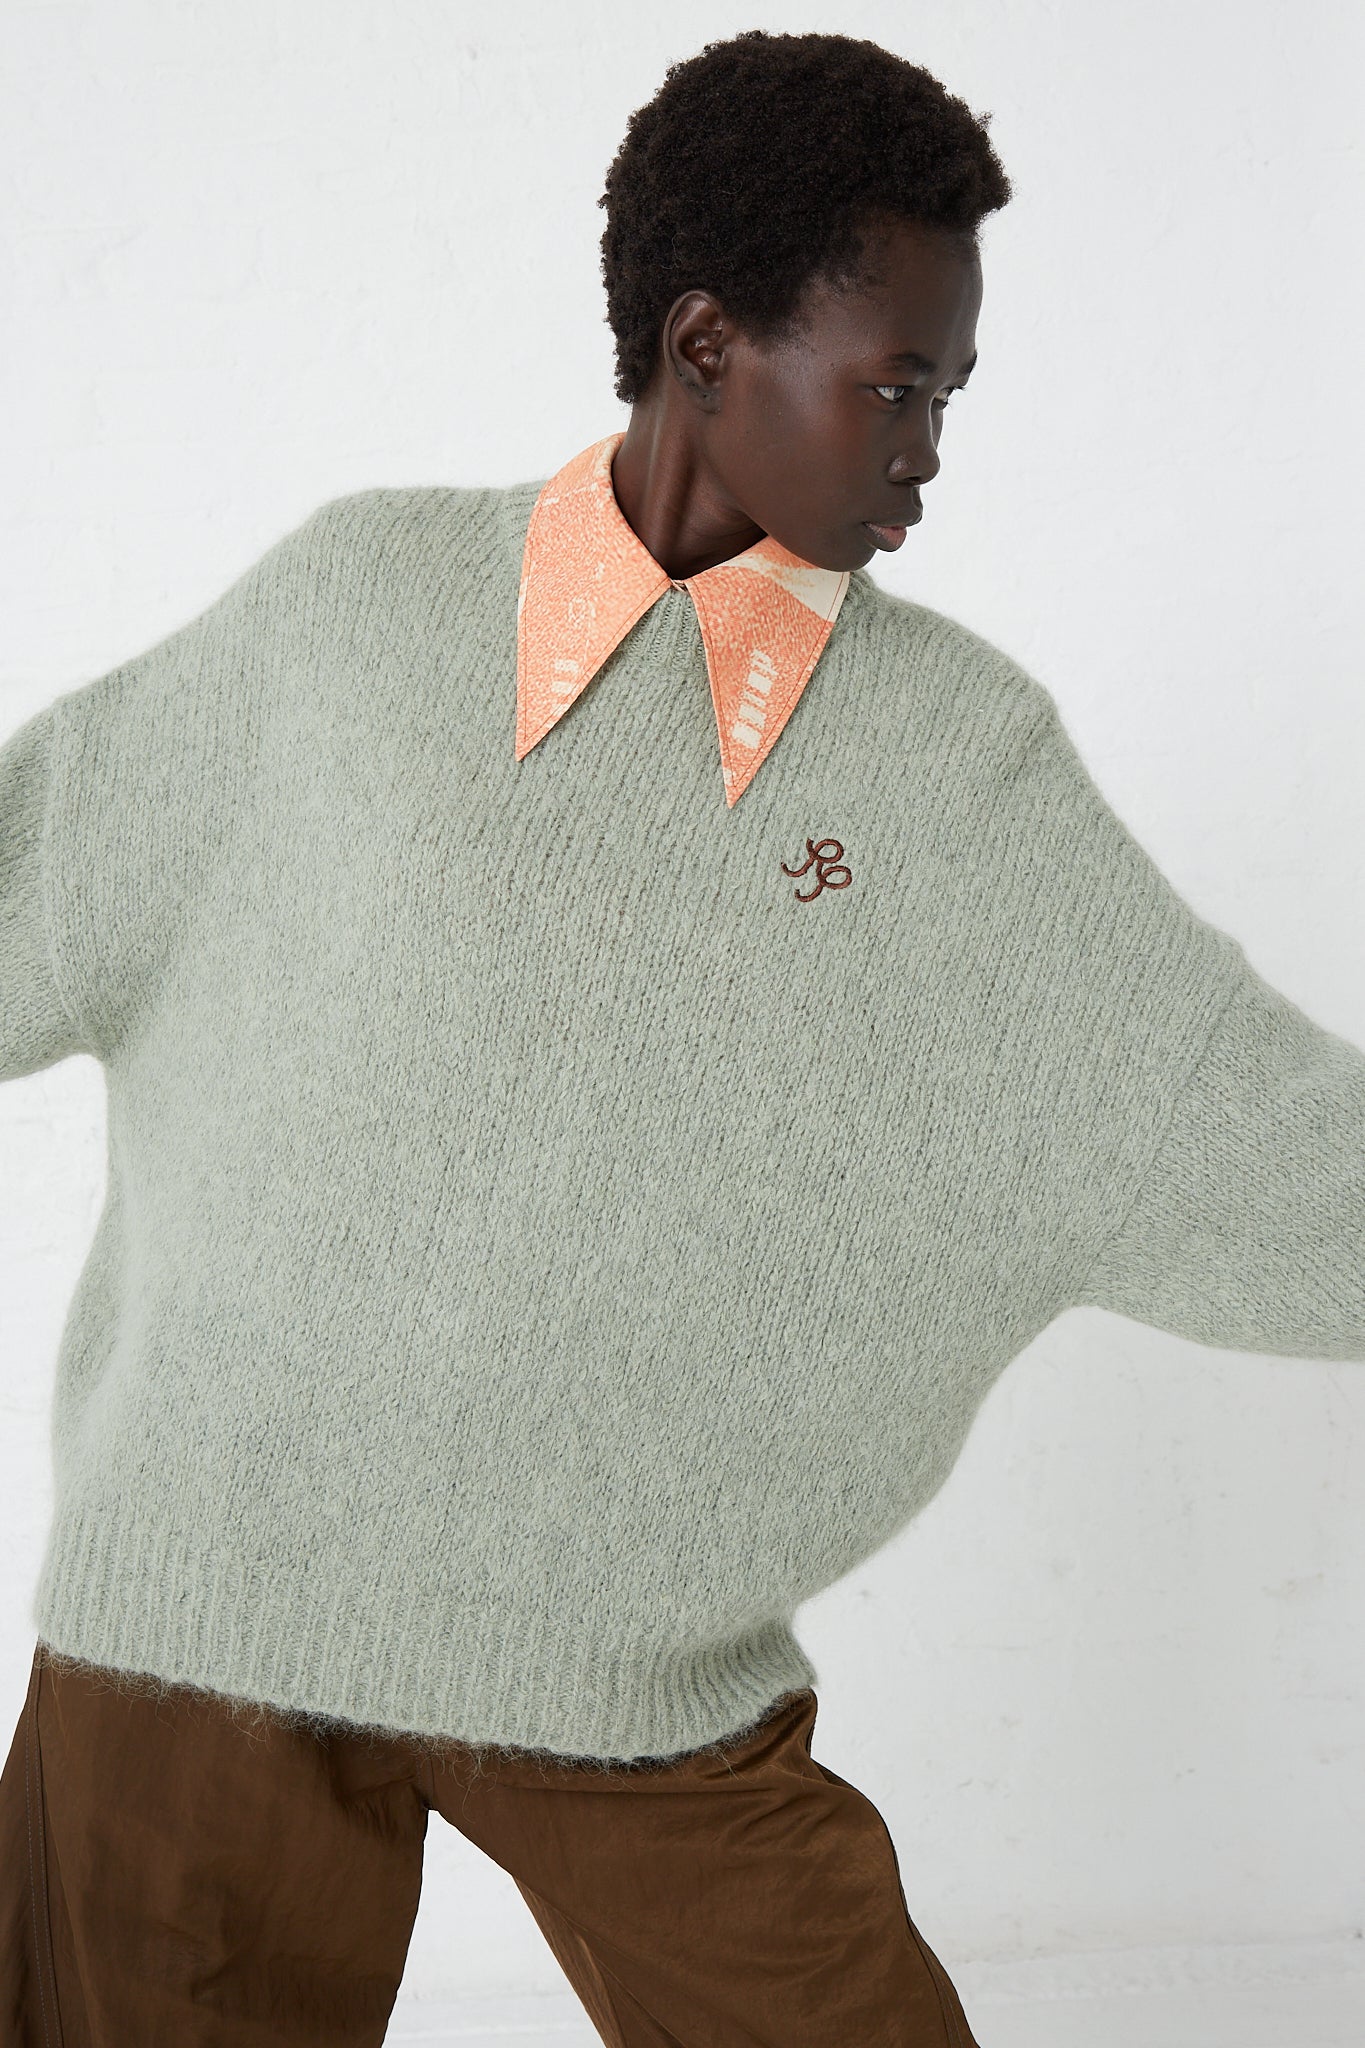 A woman donning a Rejina Pyo Alpaca Blend Toni Sweater in Mint, paired with brown pants.